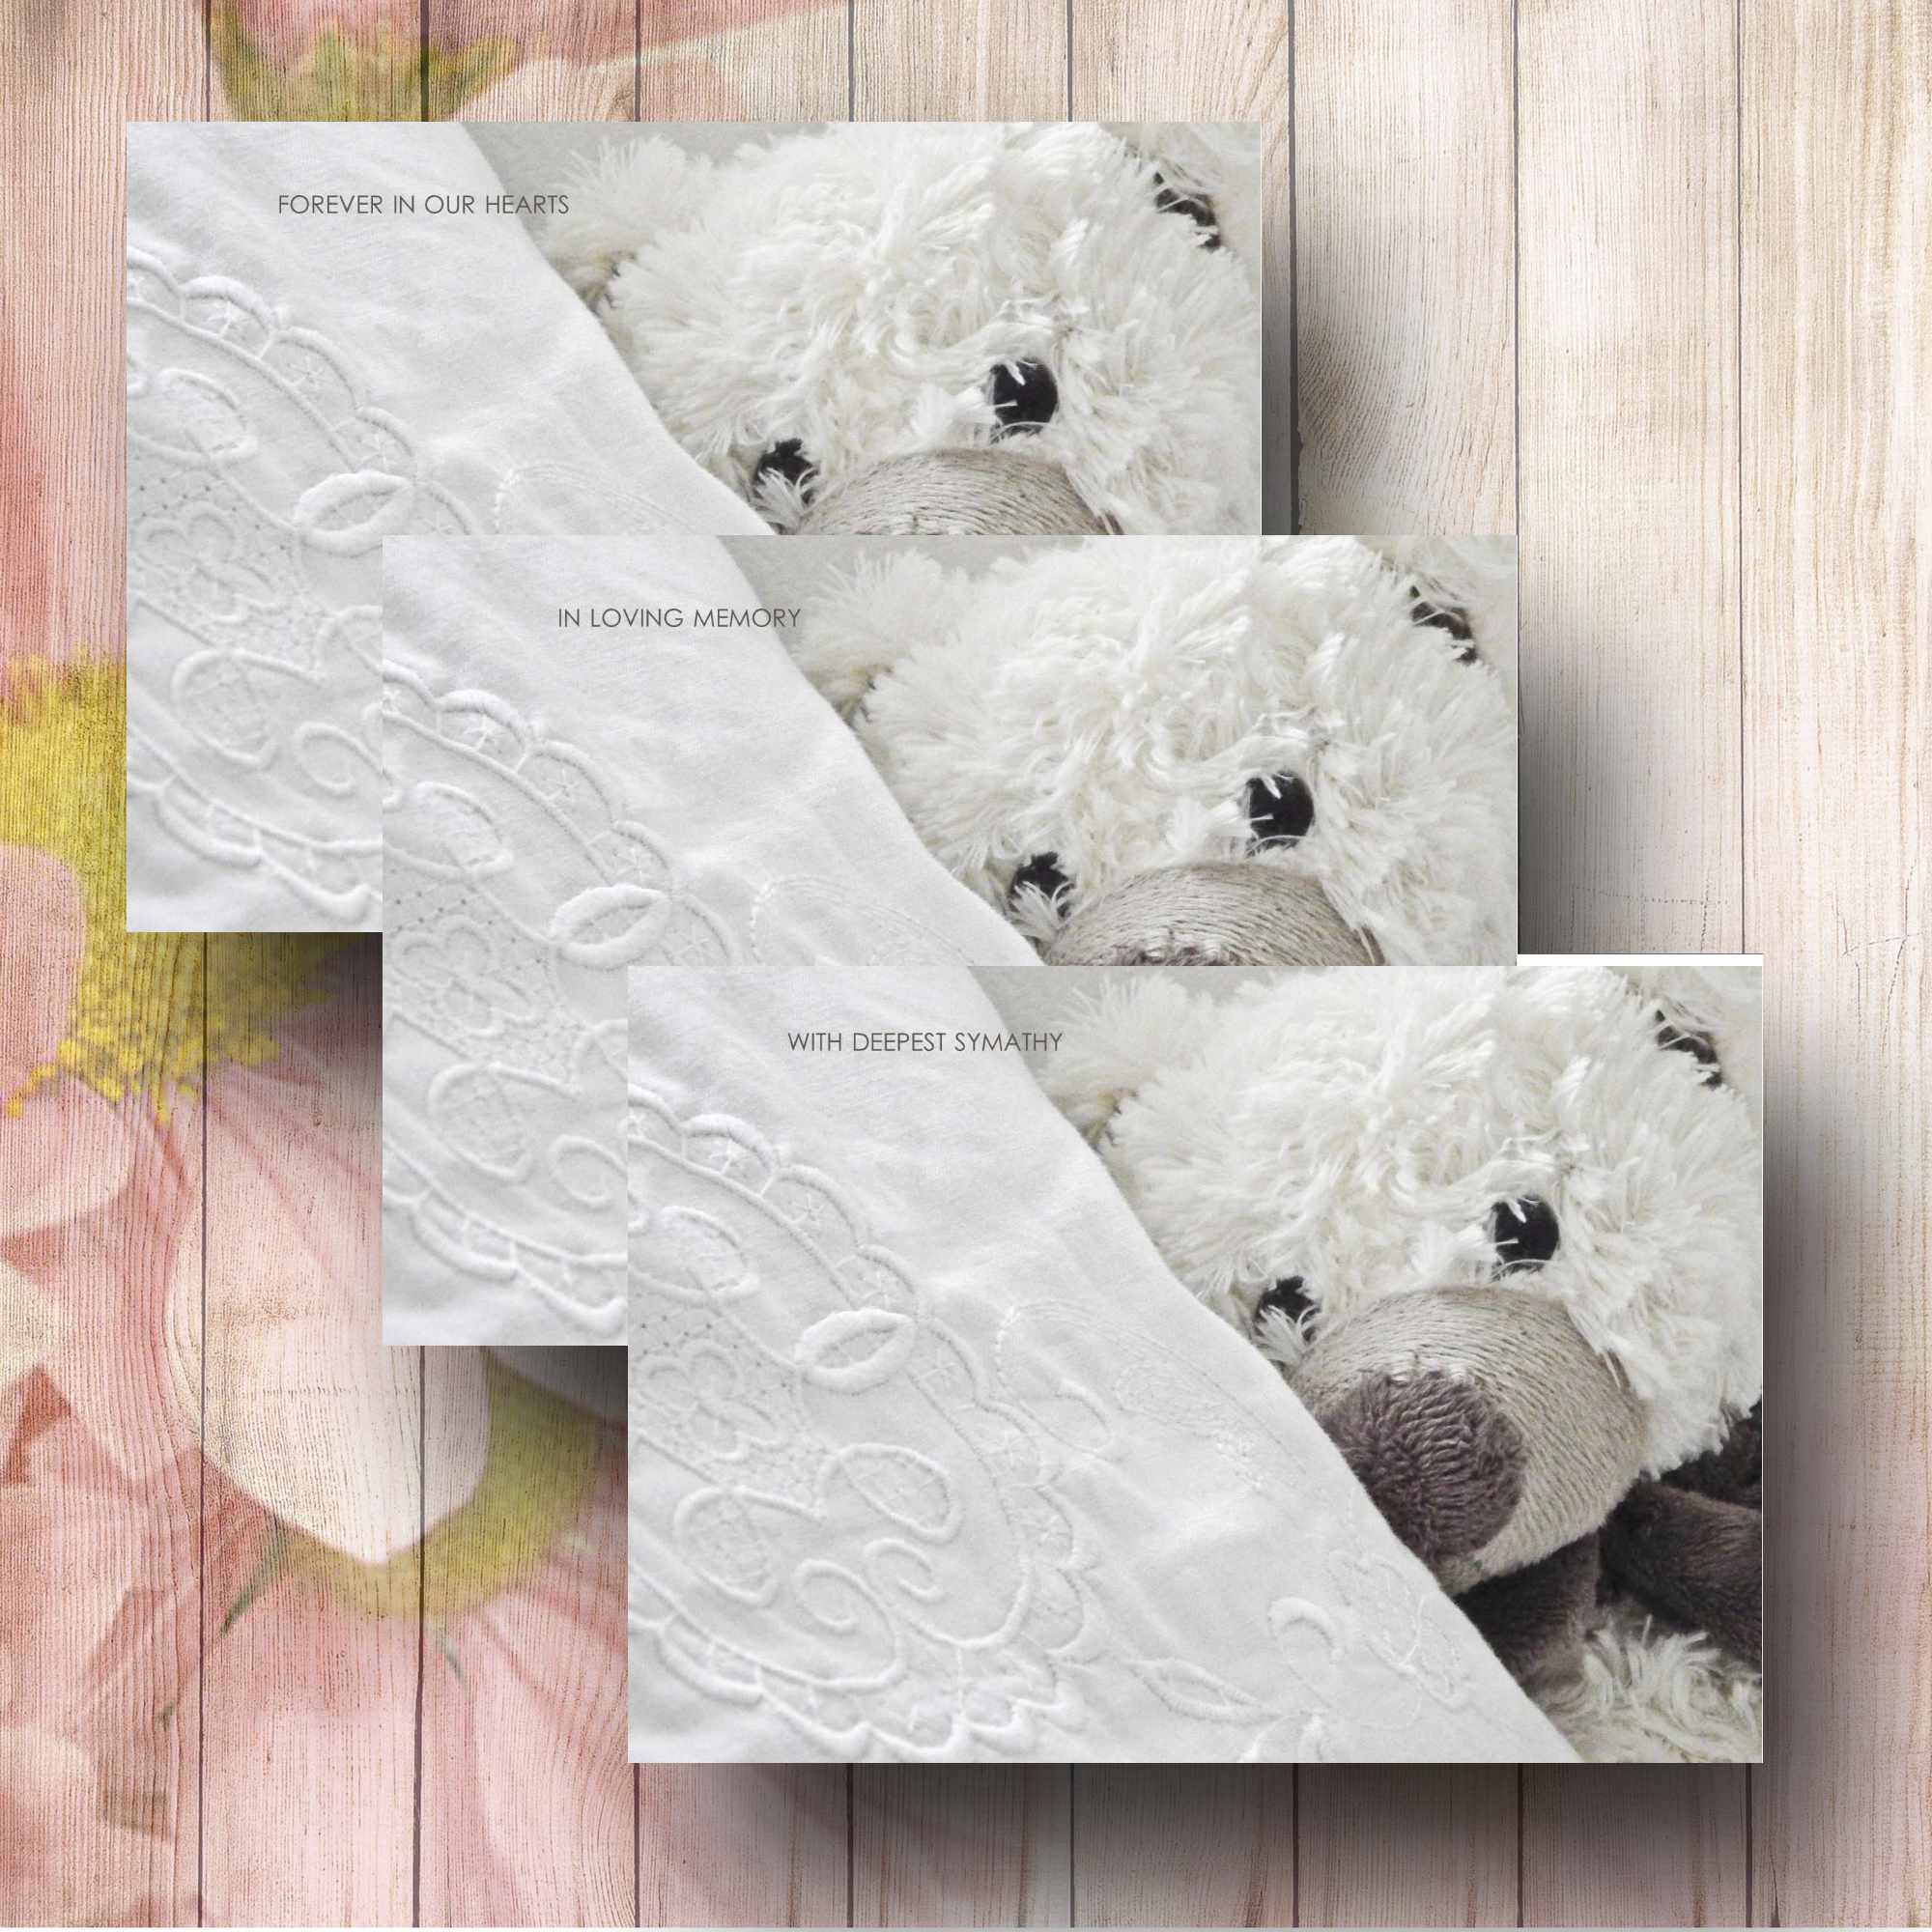 Pillow Talk Teddy Florist Funeral Cards Large Size